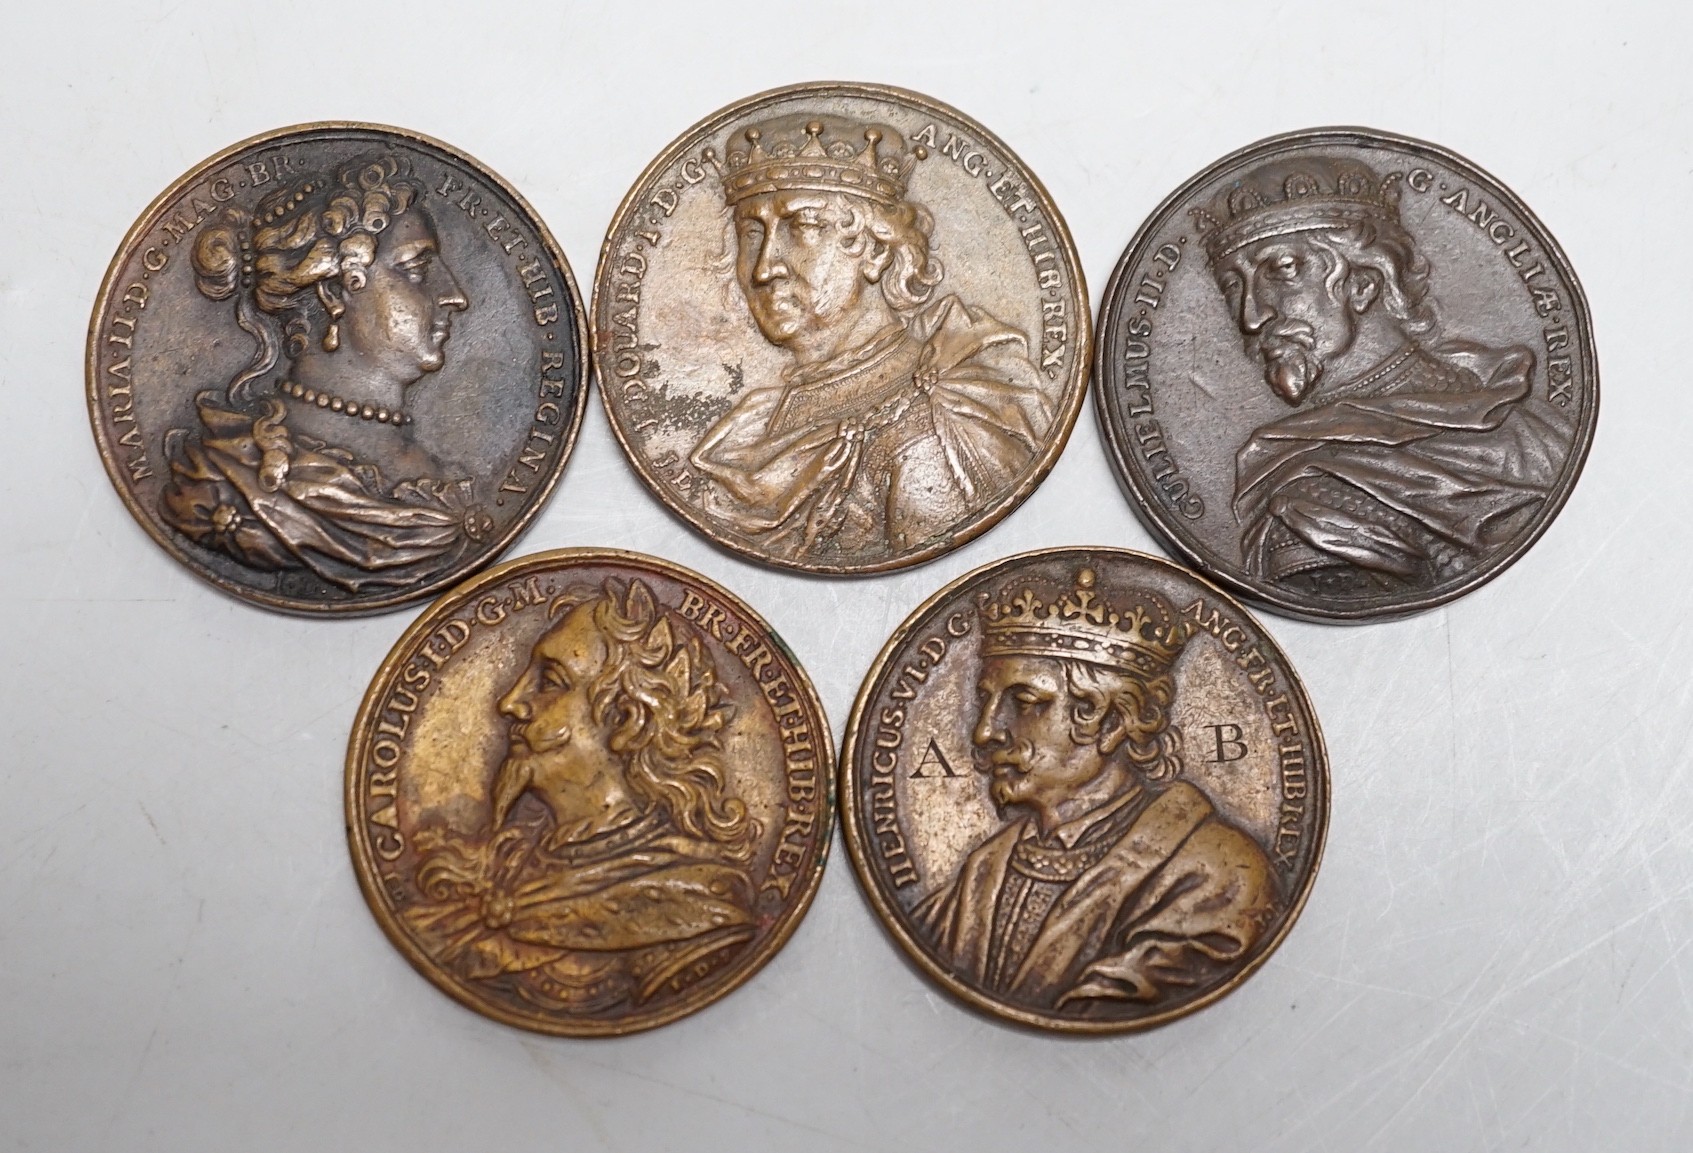 British Historical medals – Five bronze medals of Monarchs from the Kings and Queens of England by Jean Dassier, struck in 1732